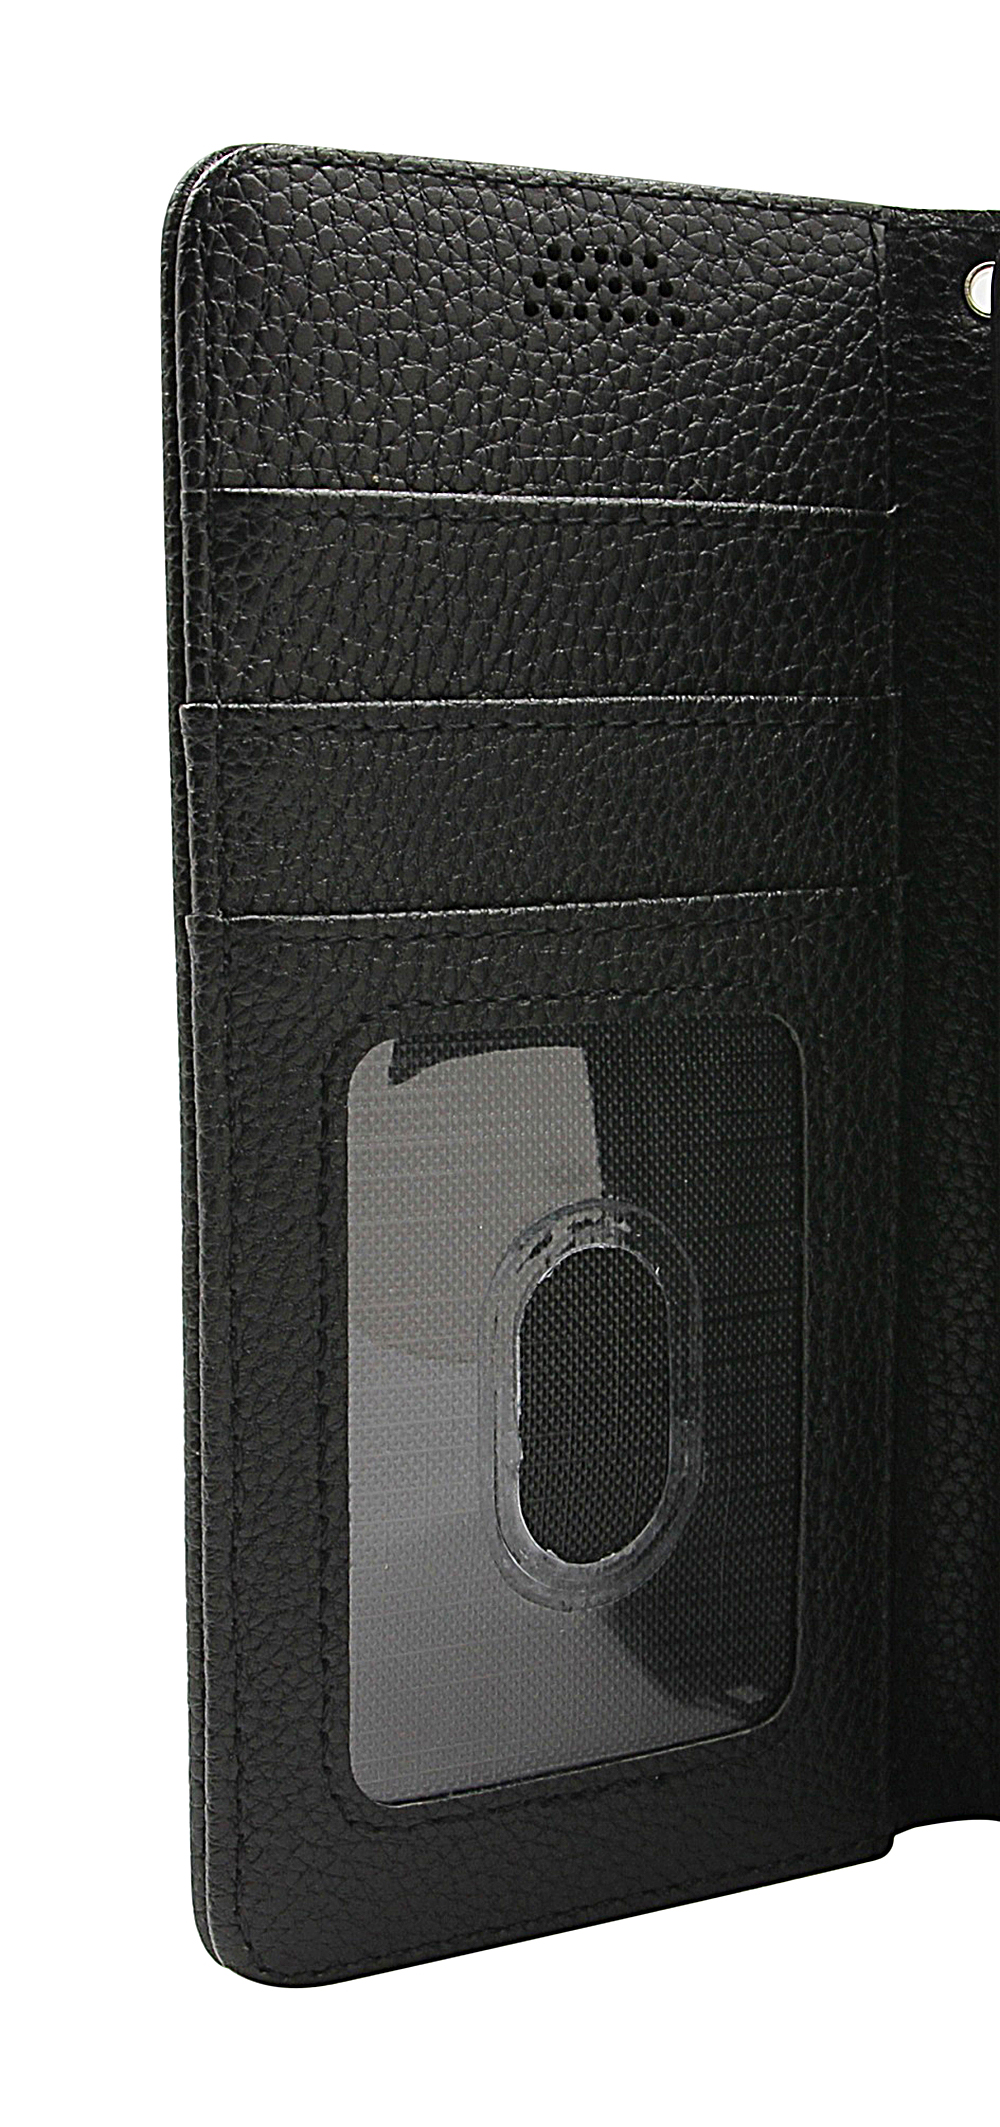 New Standcase Wallet Sony Xperia 1 V 5G (XQ-DQ72)